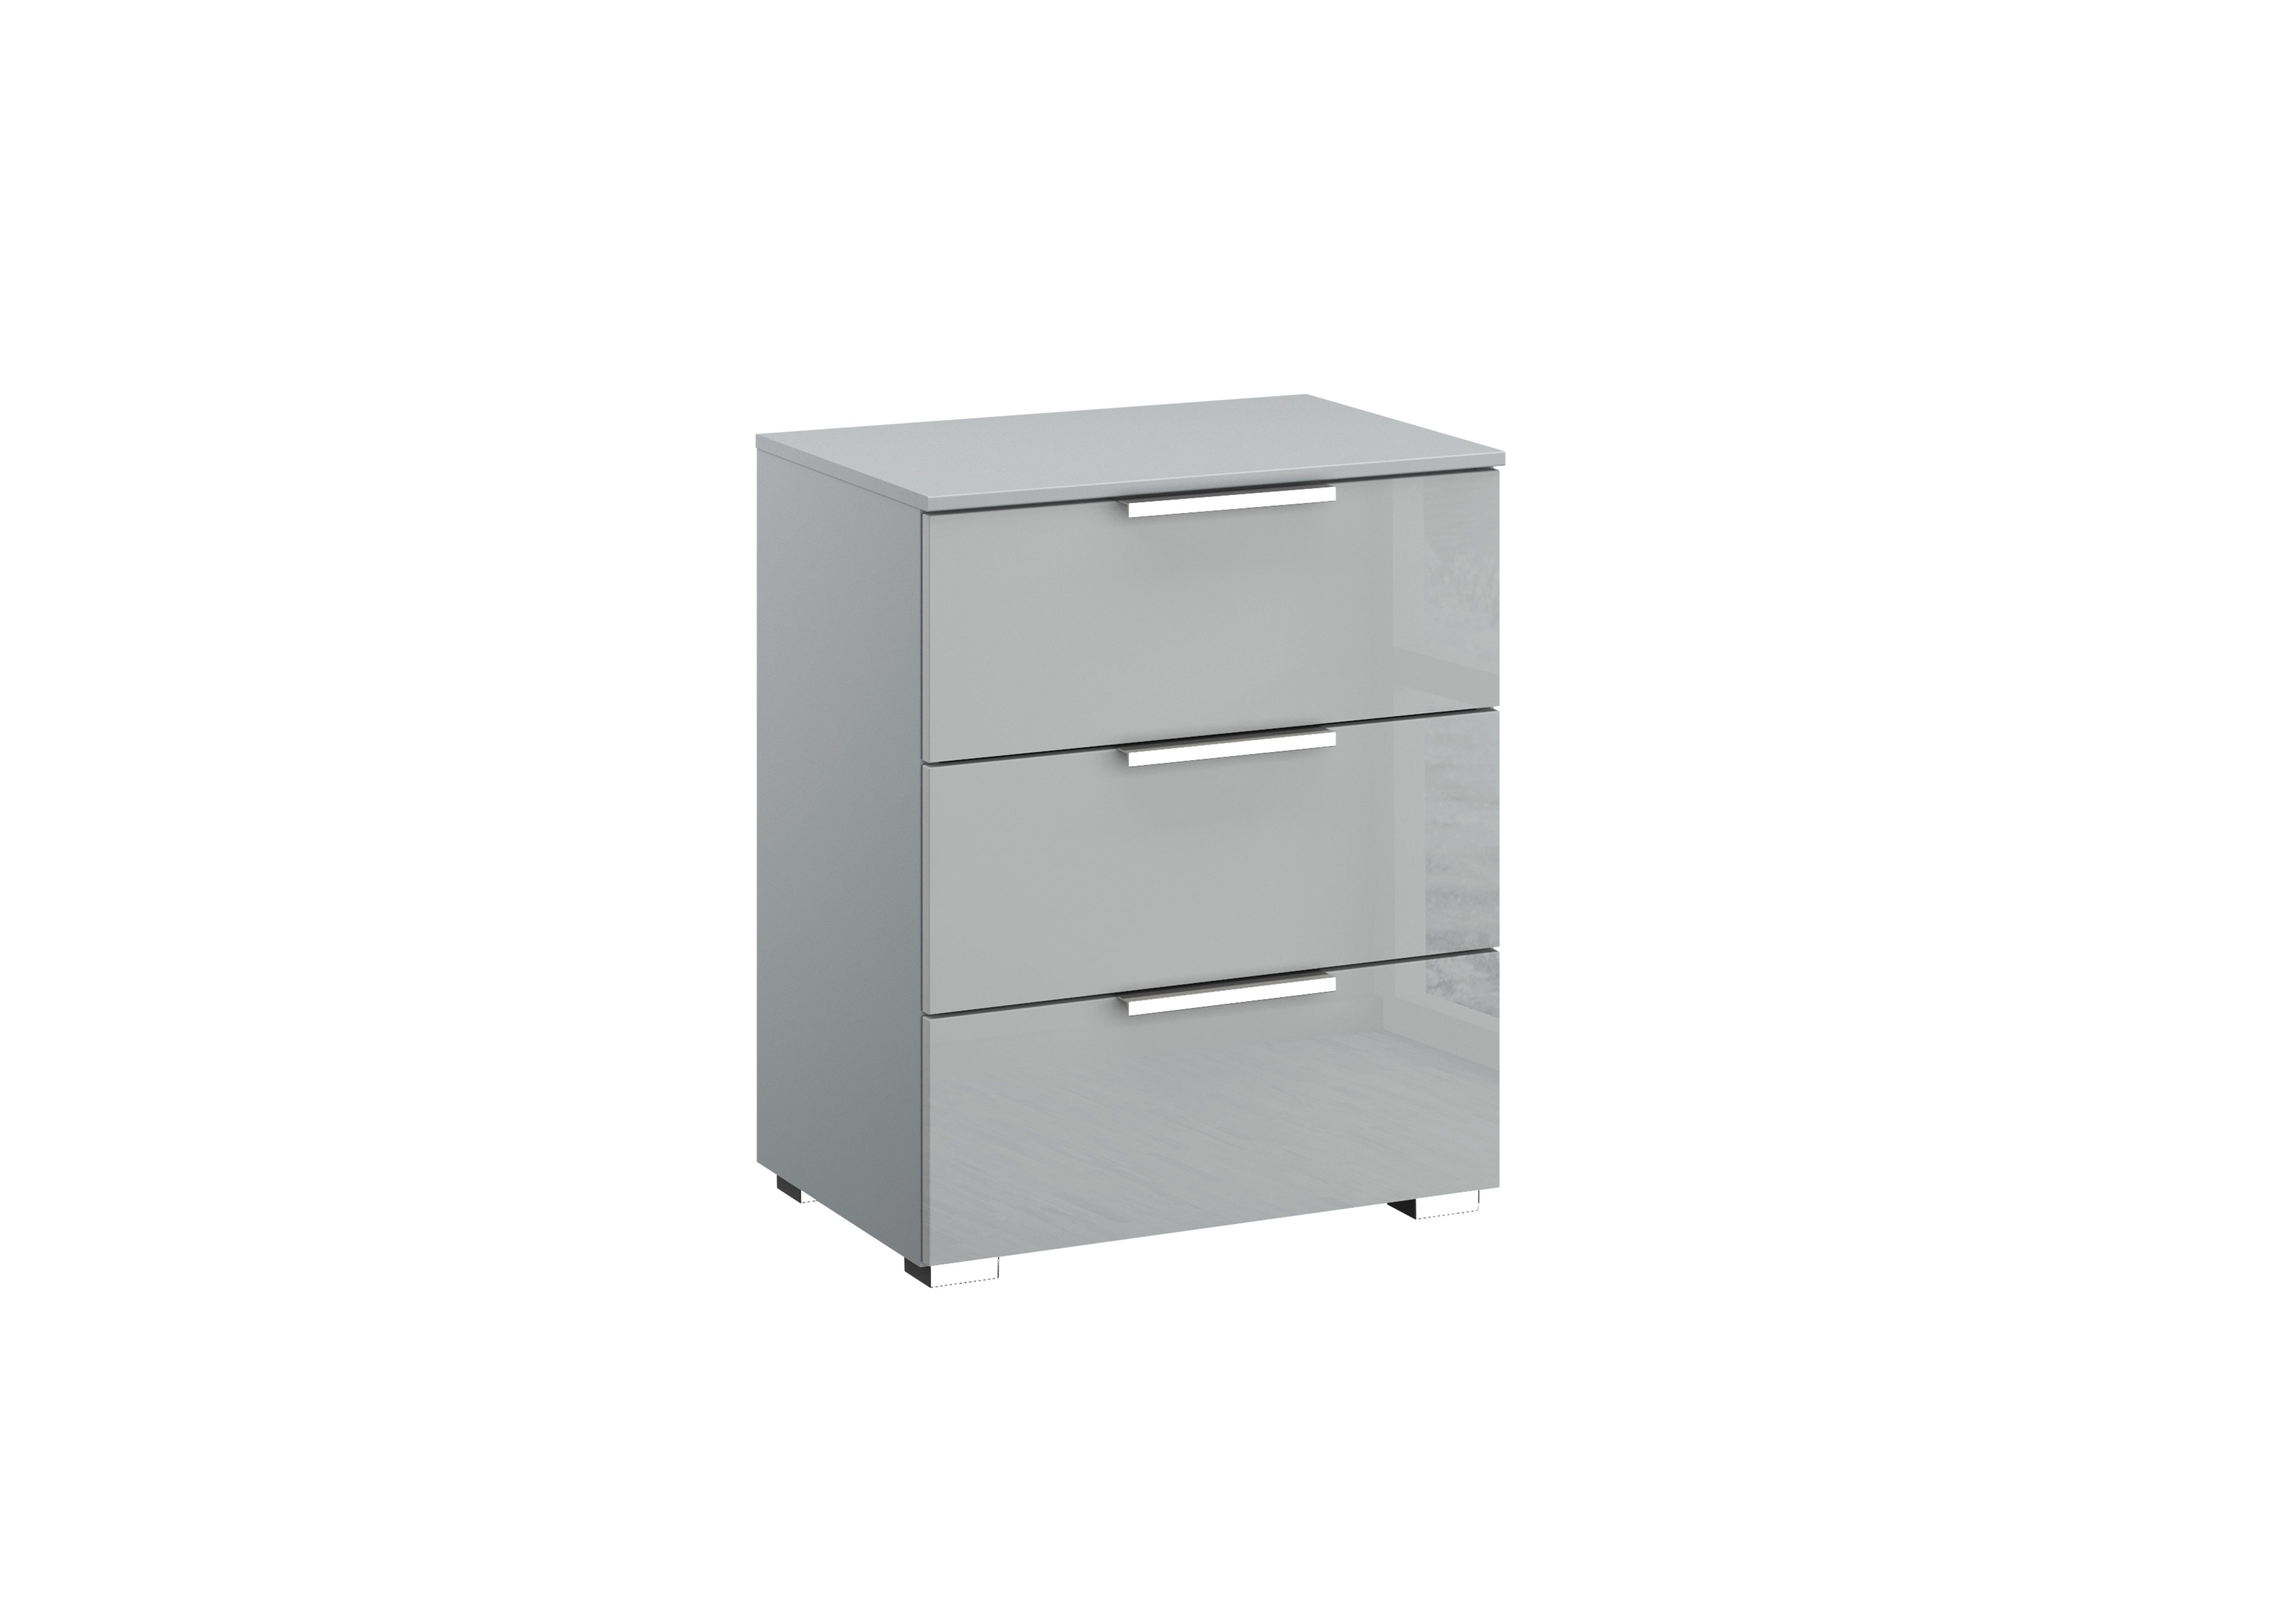 Perth 3 Drawer Bedside Chest in Z2603 Silk Grey Carc And Glass on Furniture Village